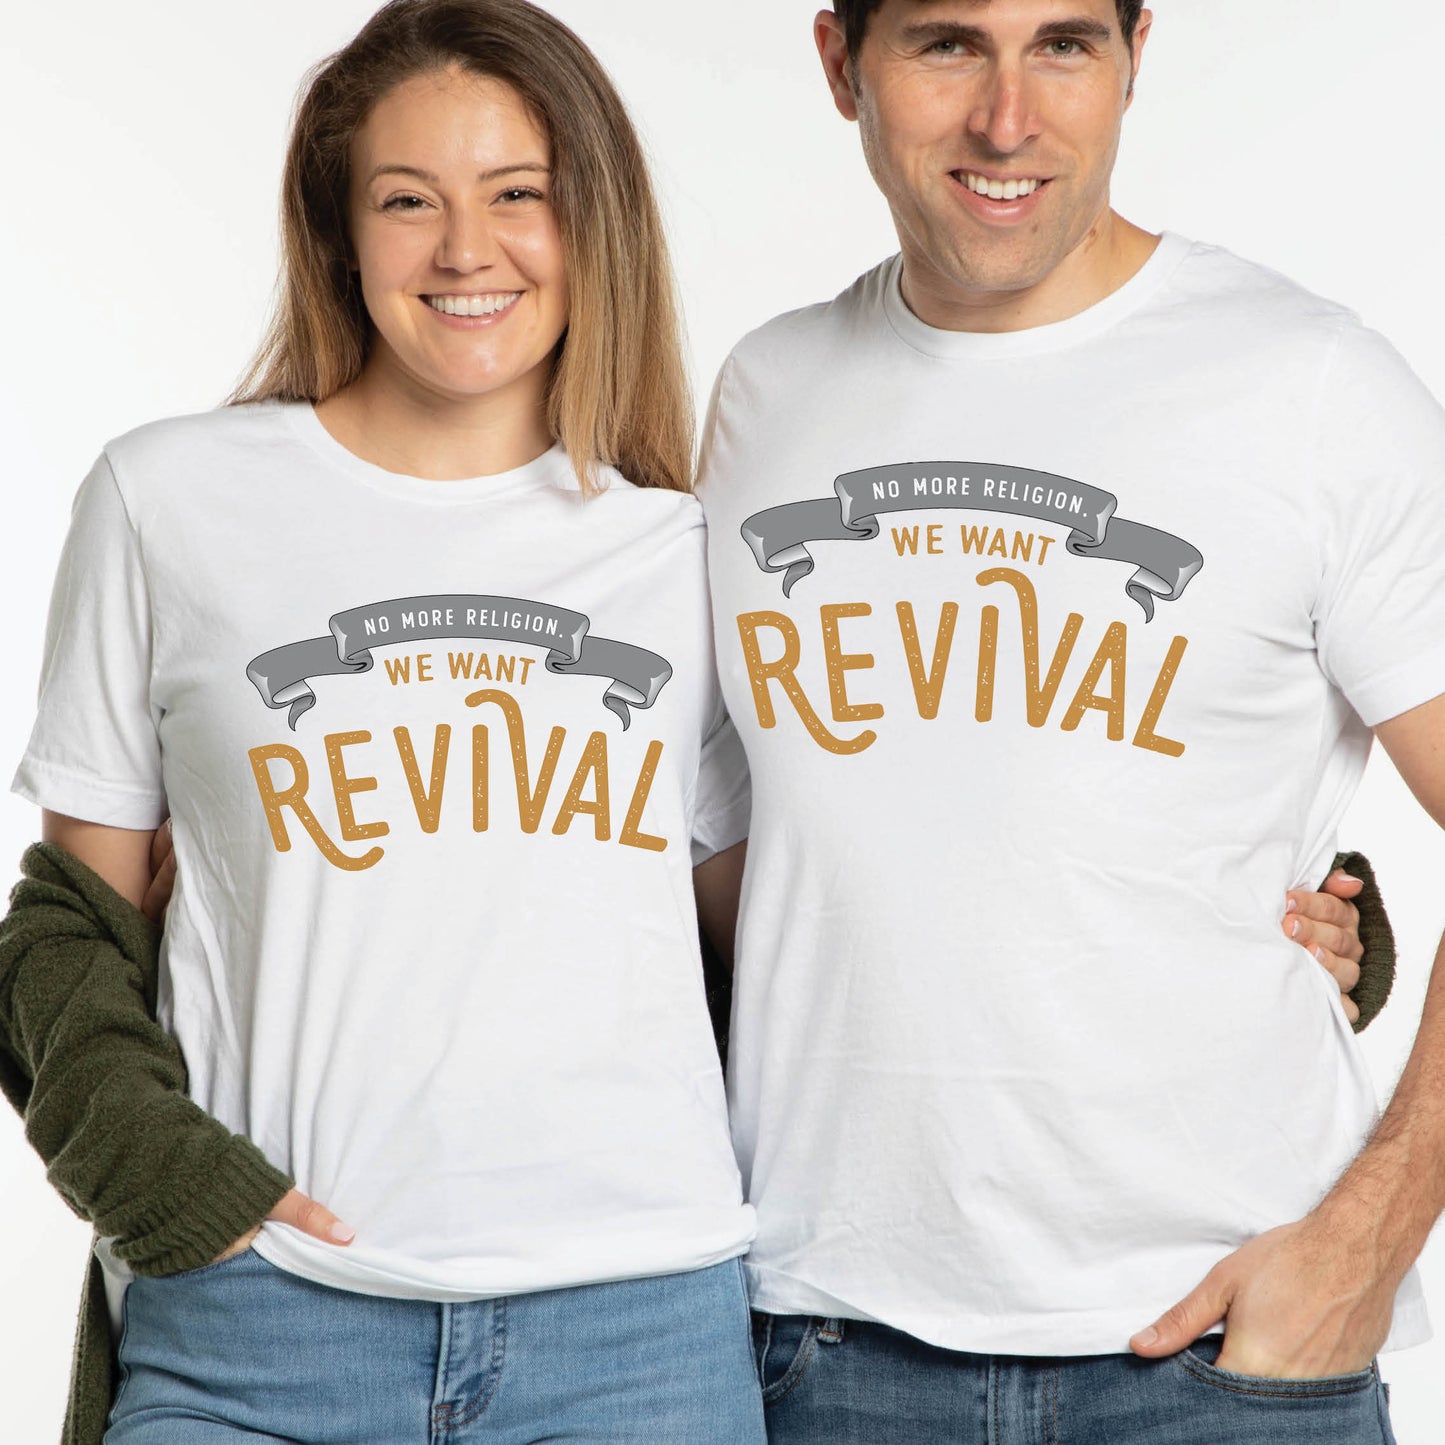 White Christian aesthetic soft Unisex T-shirt that says, No More Religion We Want Revival printed in gold and black, church gift Jesus couple graphic tees designed for men and women 